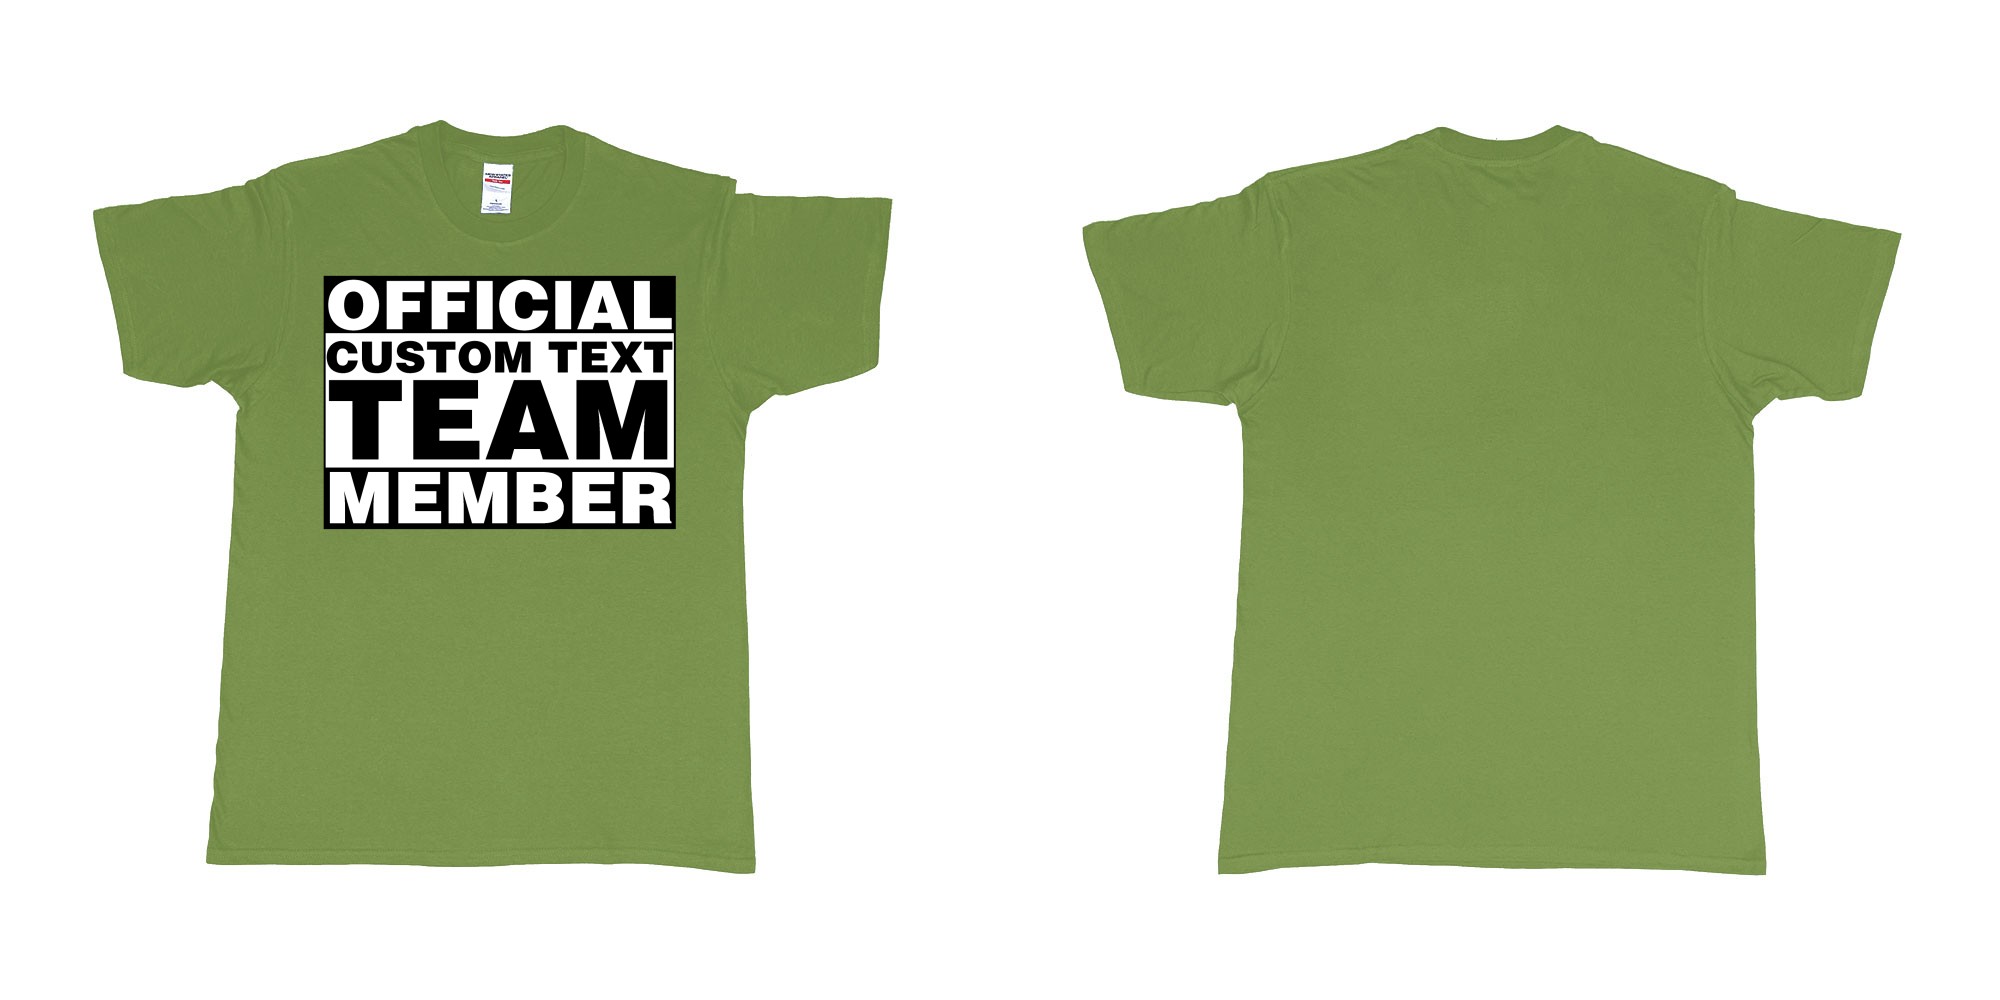 Custom tshirt design official custom text team member in fabric color military-green choice your own text made in Bali by The Pirate Way